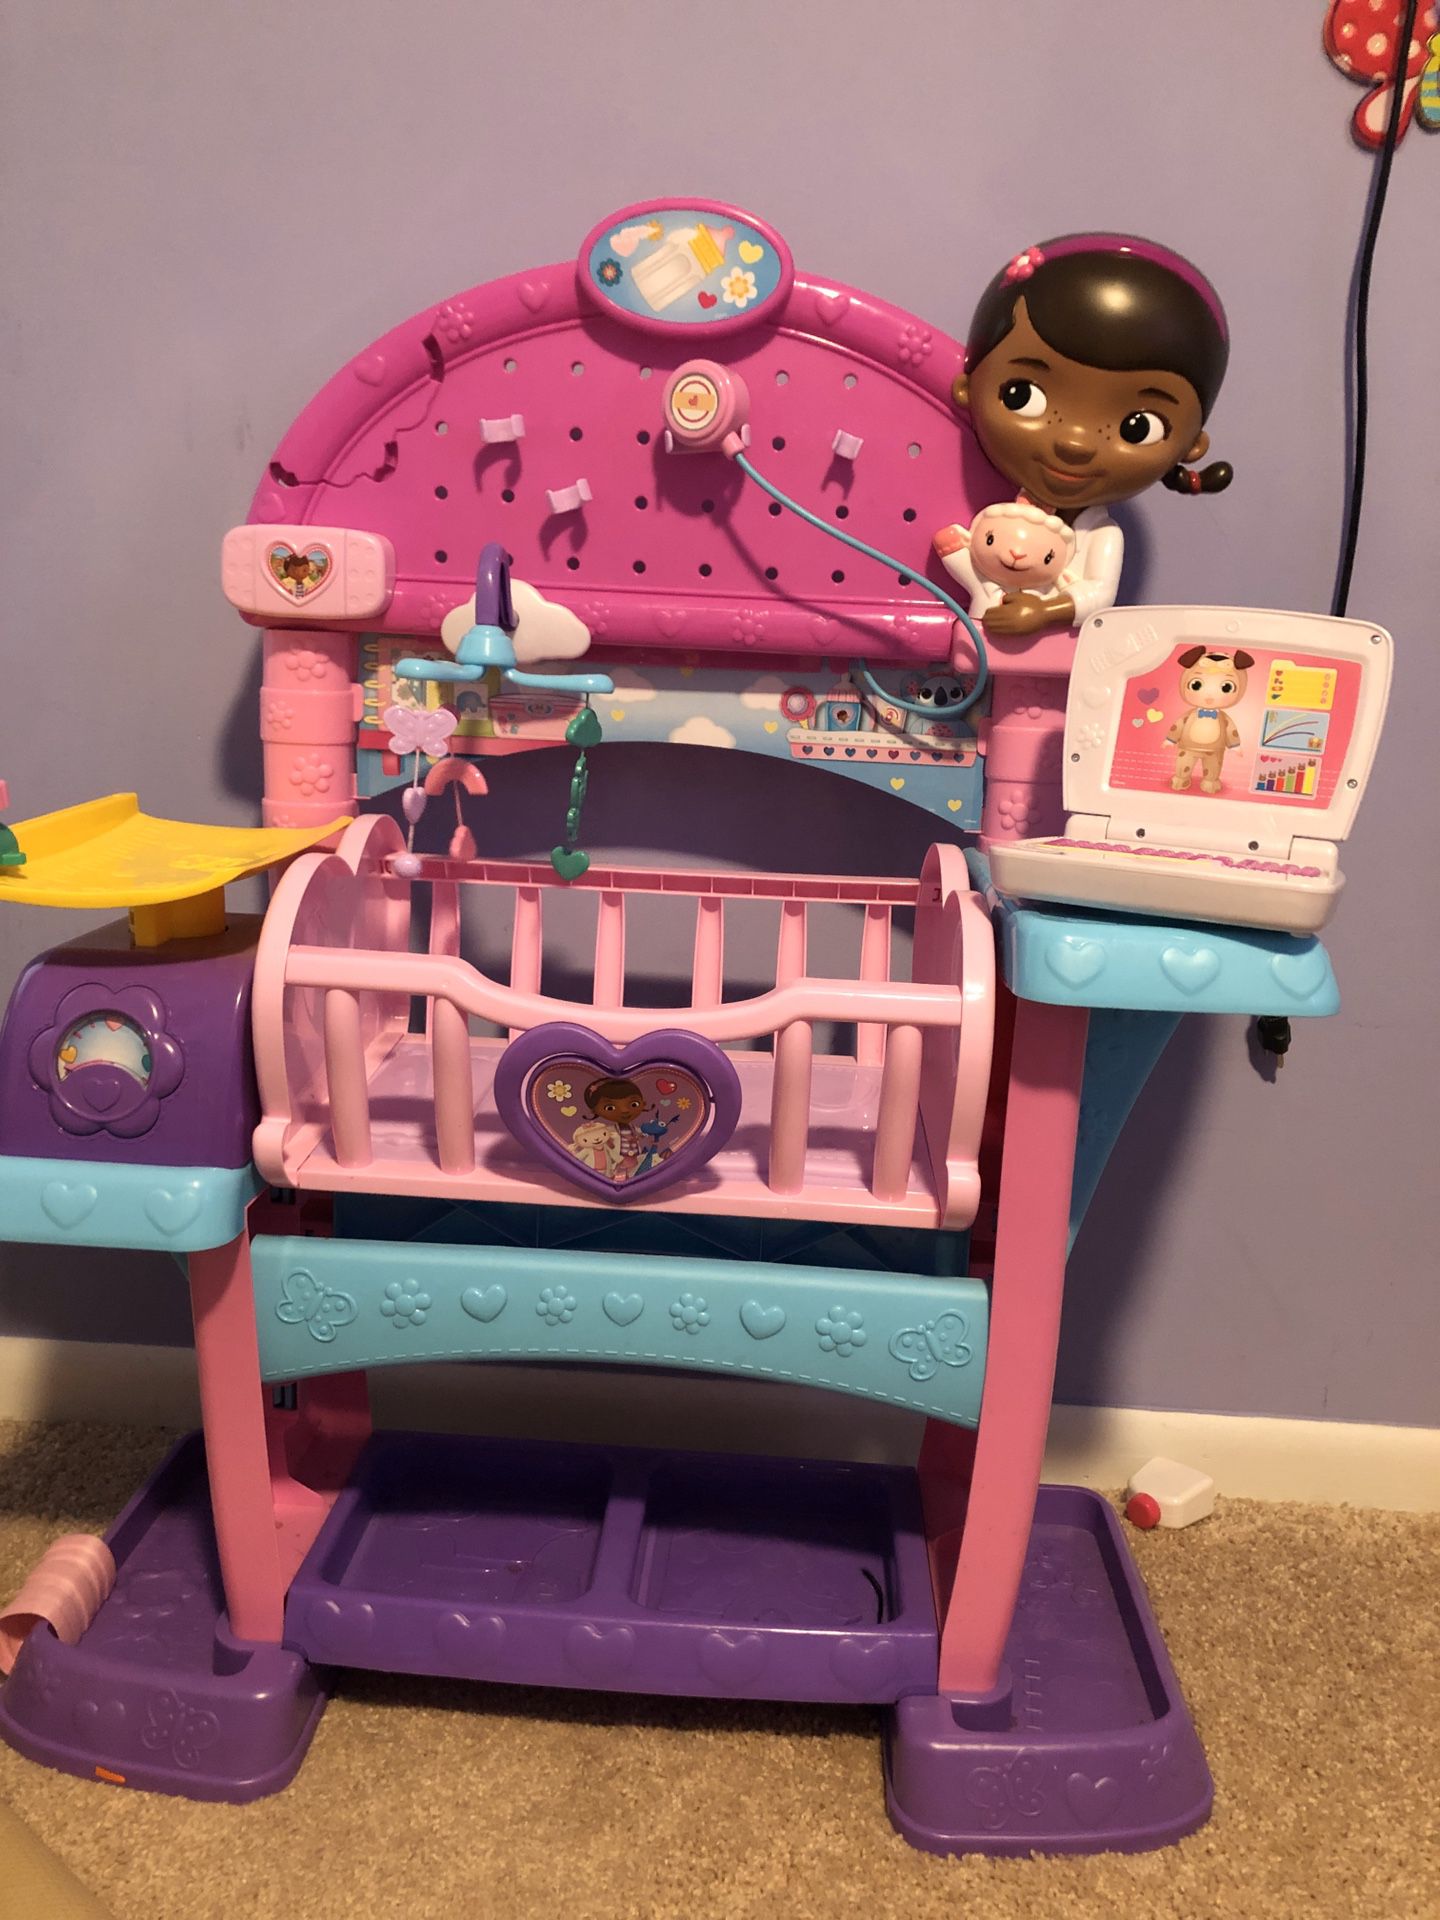 Play baby doll doctor bed